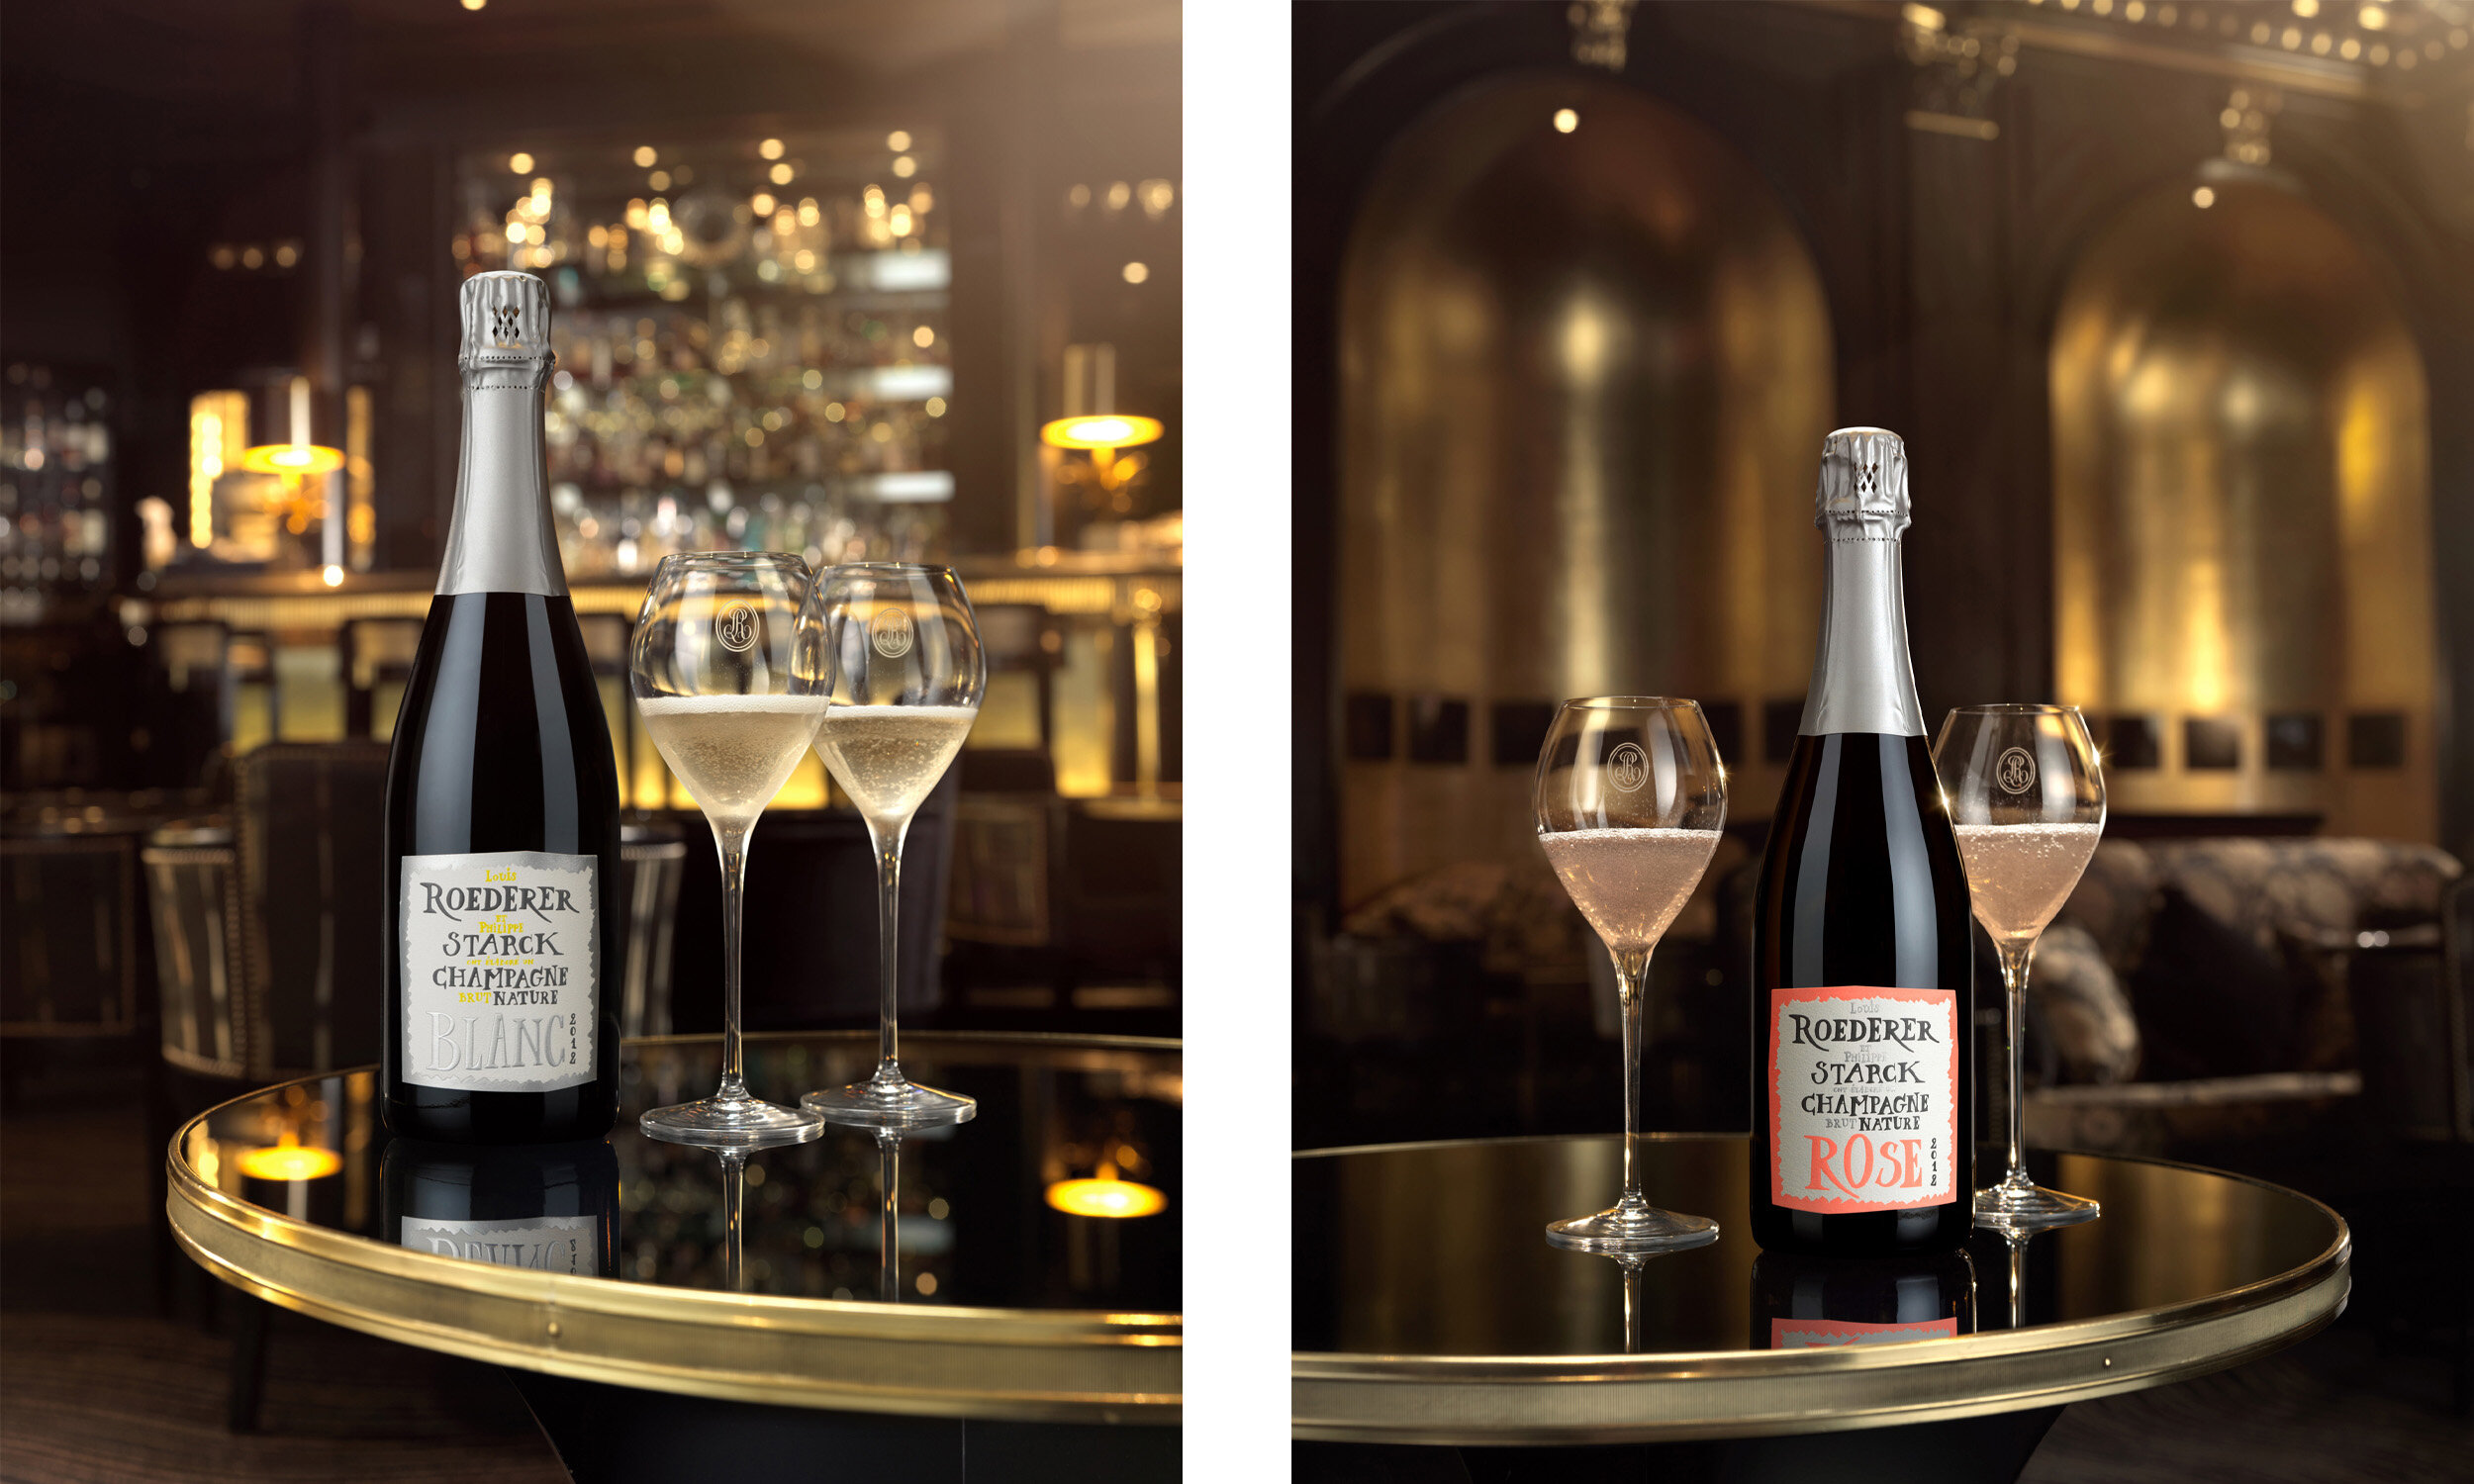 On location drinks photography for luxury Champagne brand Louis Roederer in The Beaufort Bar, The Savoy in London